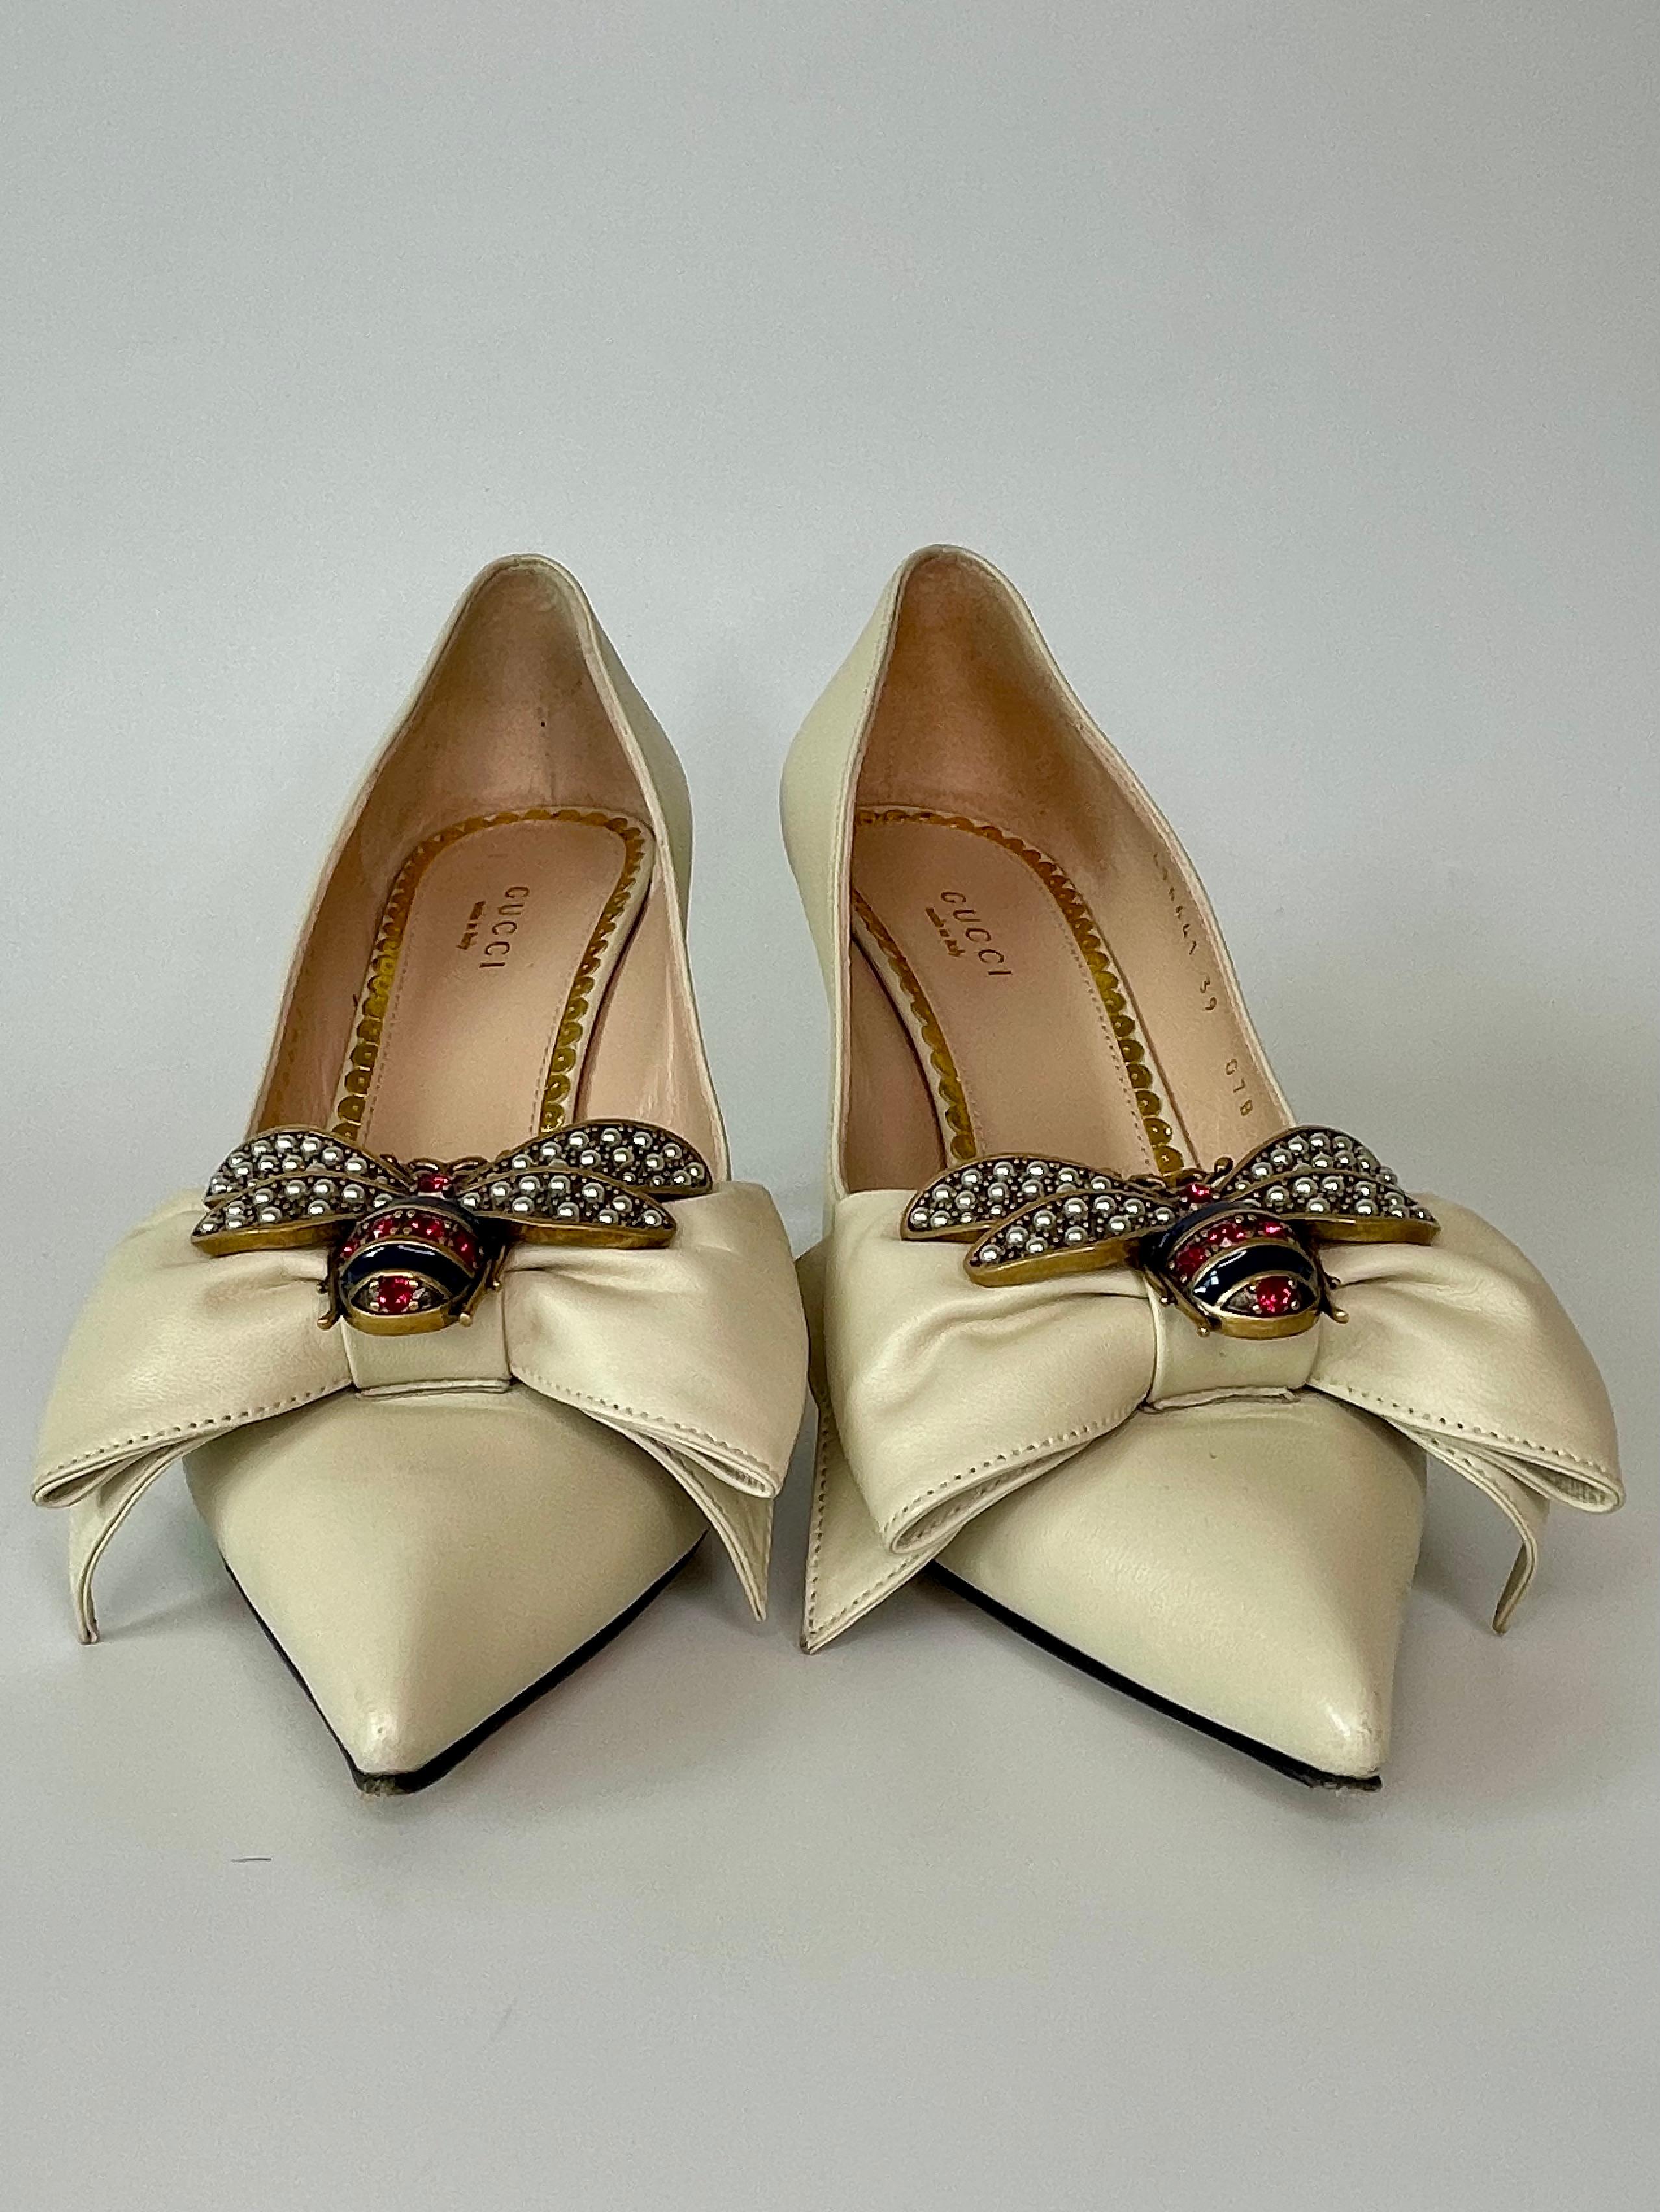 These Gucci pumps are made with cream leather and feature a pointed toe, heels measuring 3 inches and an oversize leather bow with a metallic bee detail embellishment at centre. The bee is encrusted with pearl effect studs and enamel